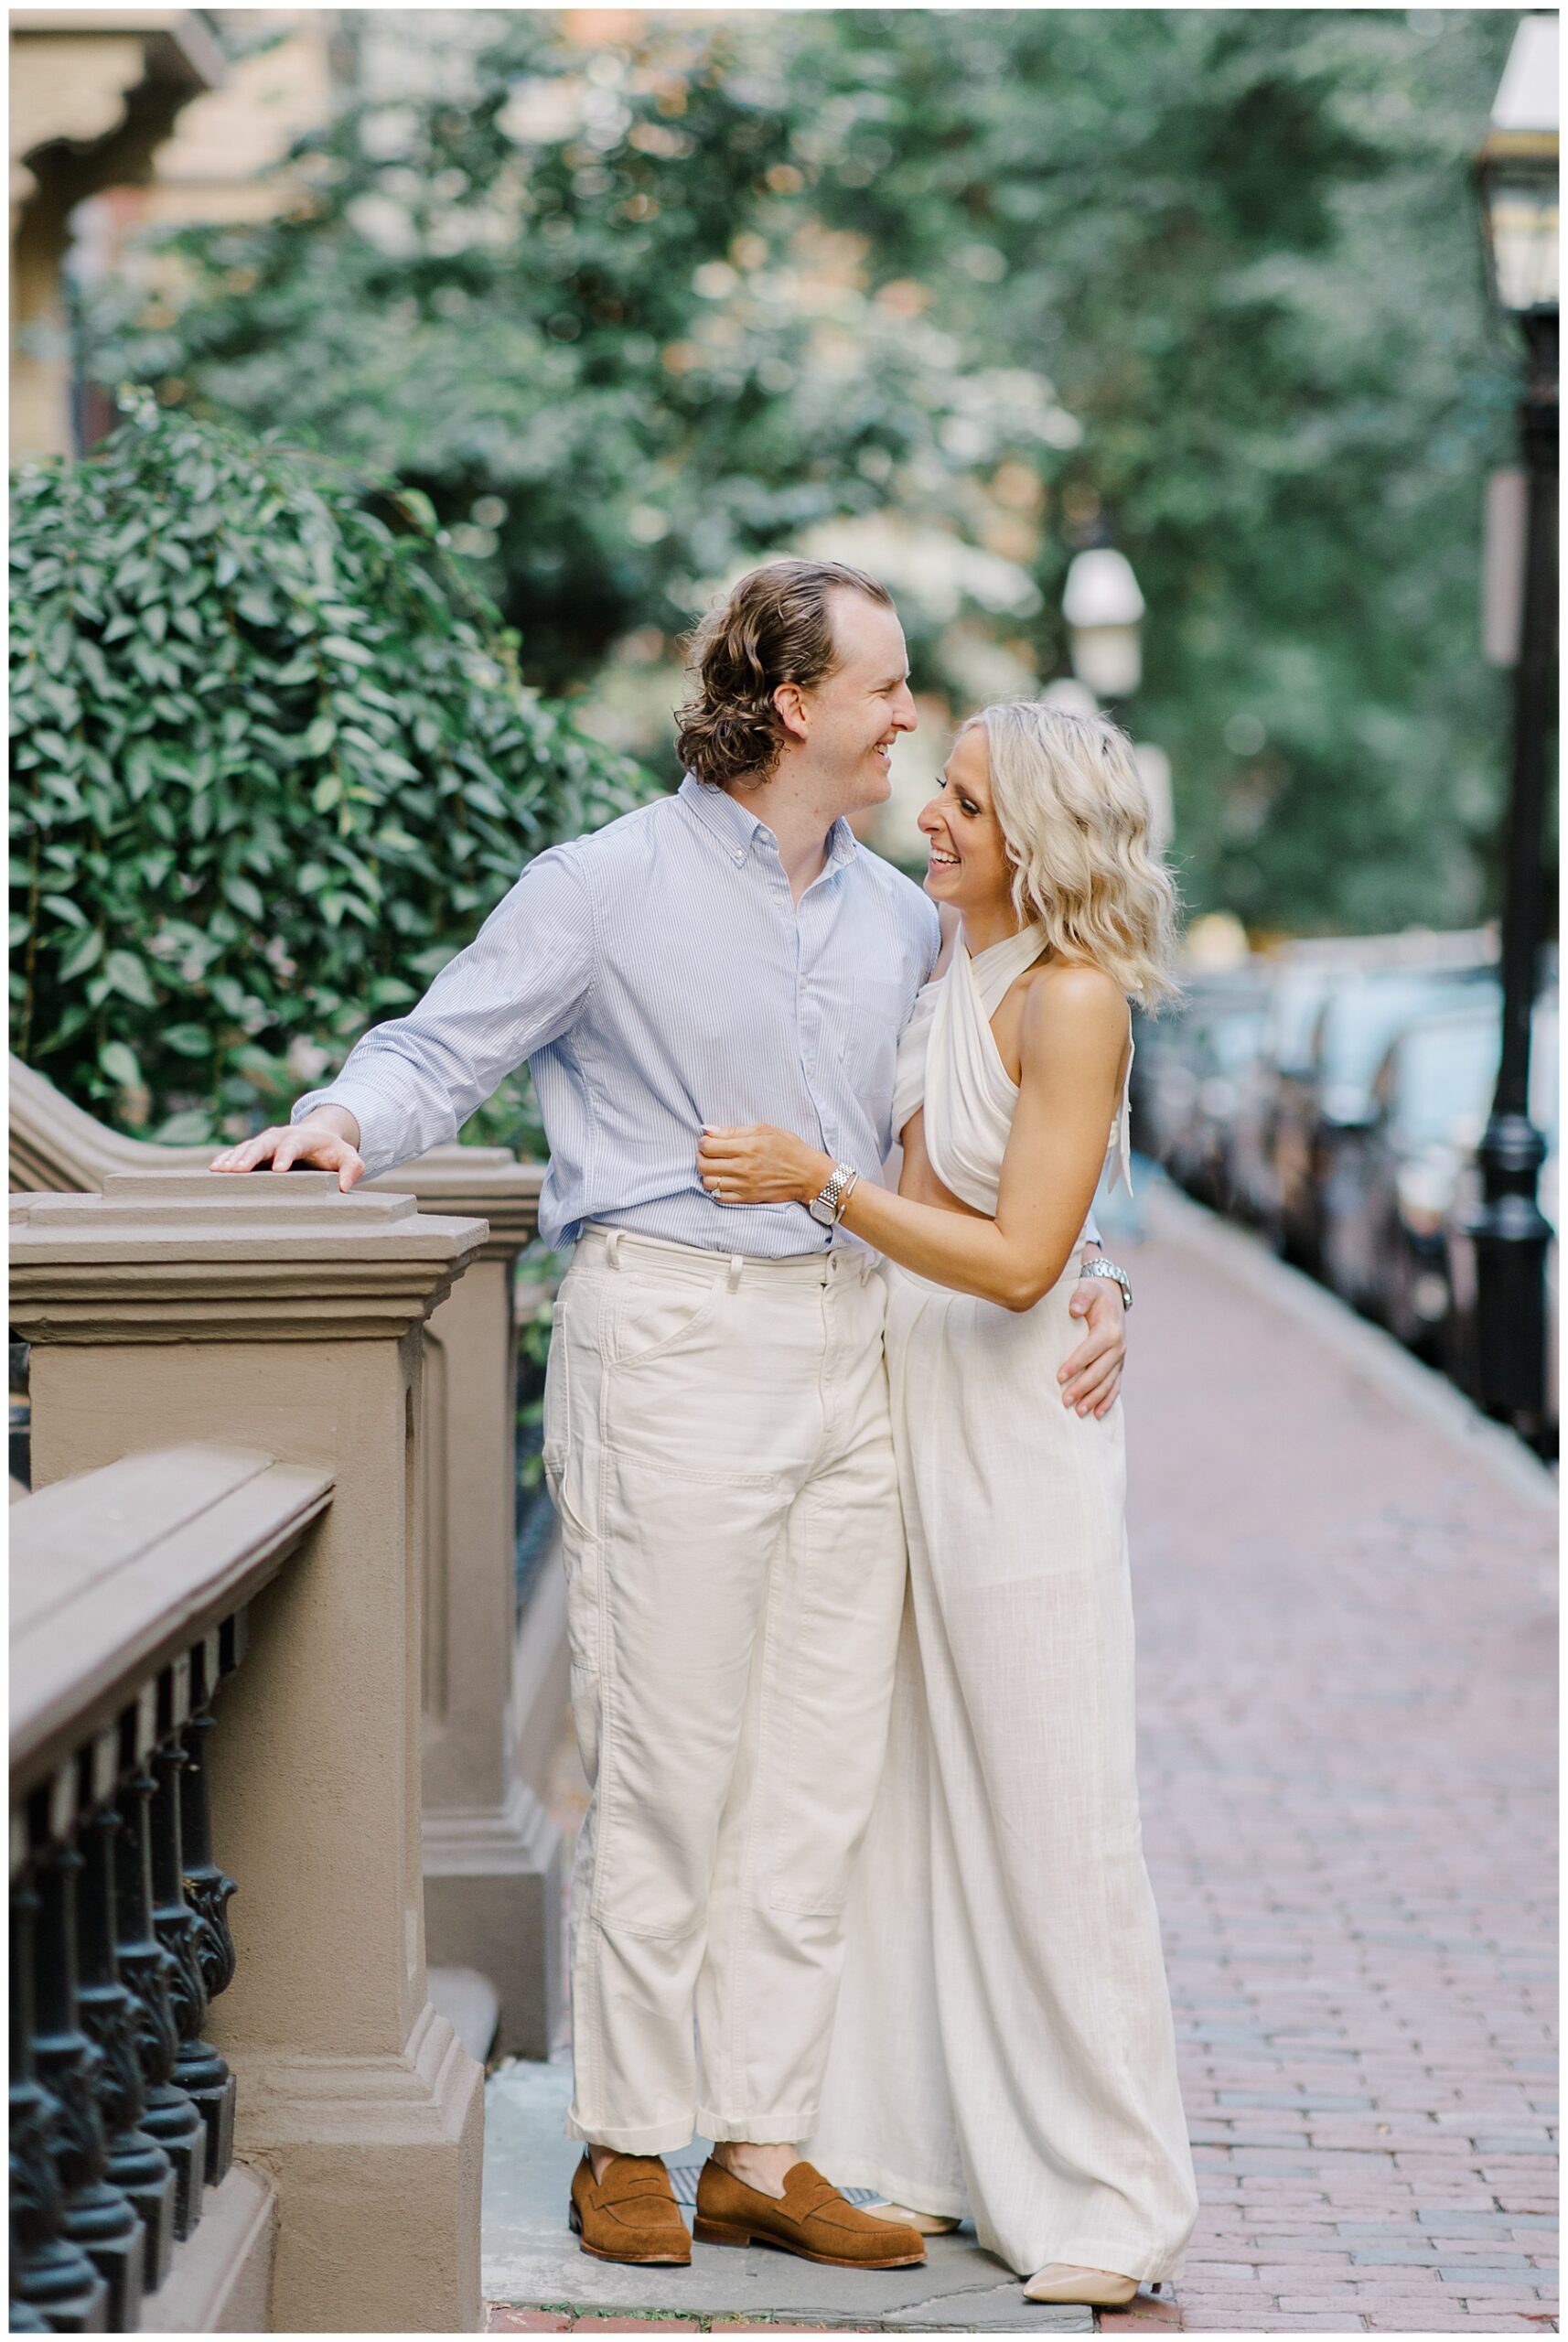 romantic and candid engagement portaits by Boston Engagement photographer, Stephanie Berenson Photography 